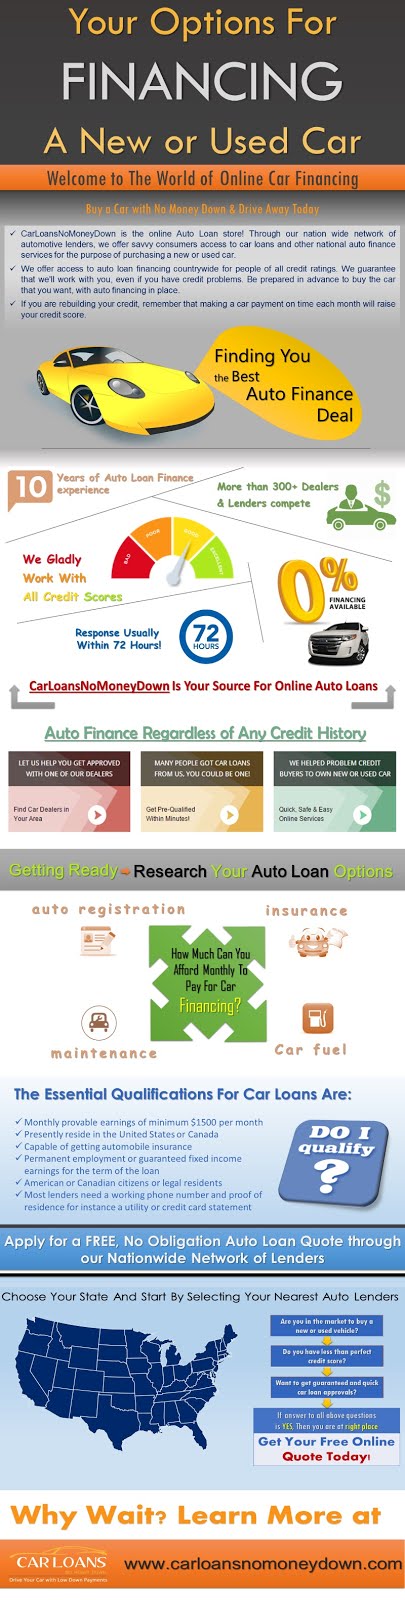 Your Auto Loan Financing Options